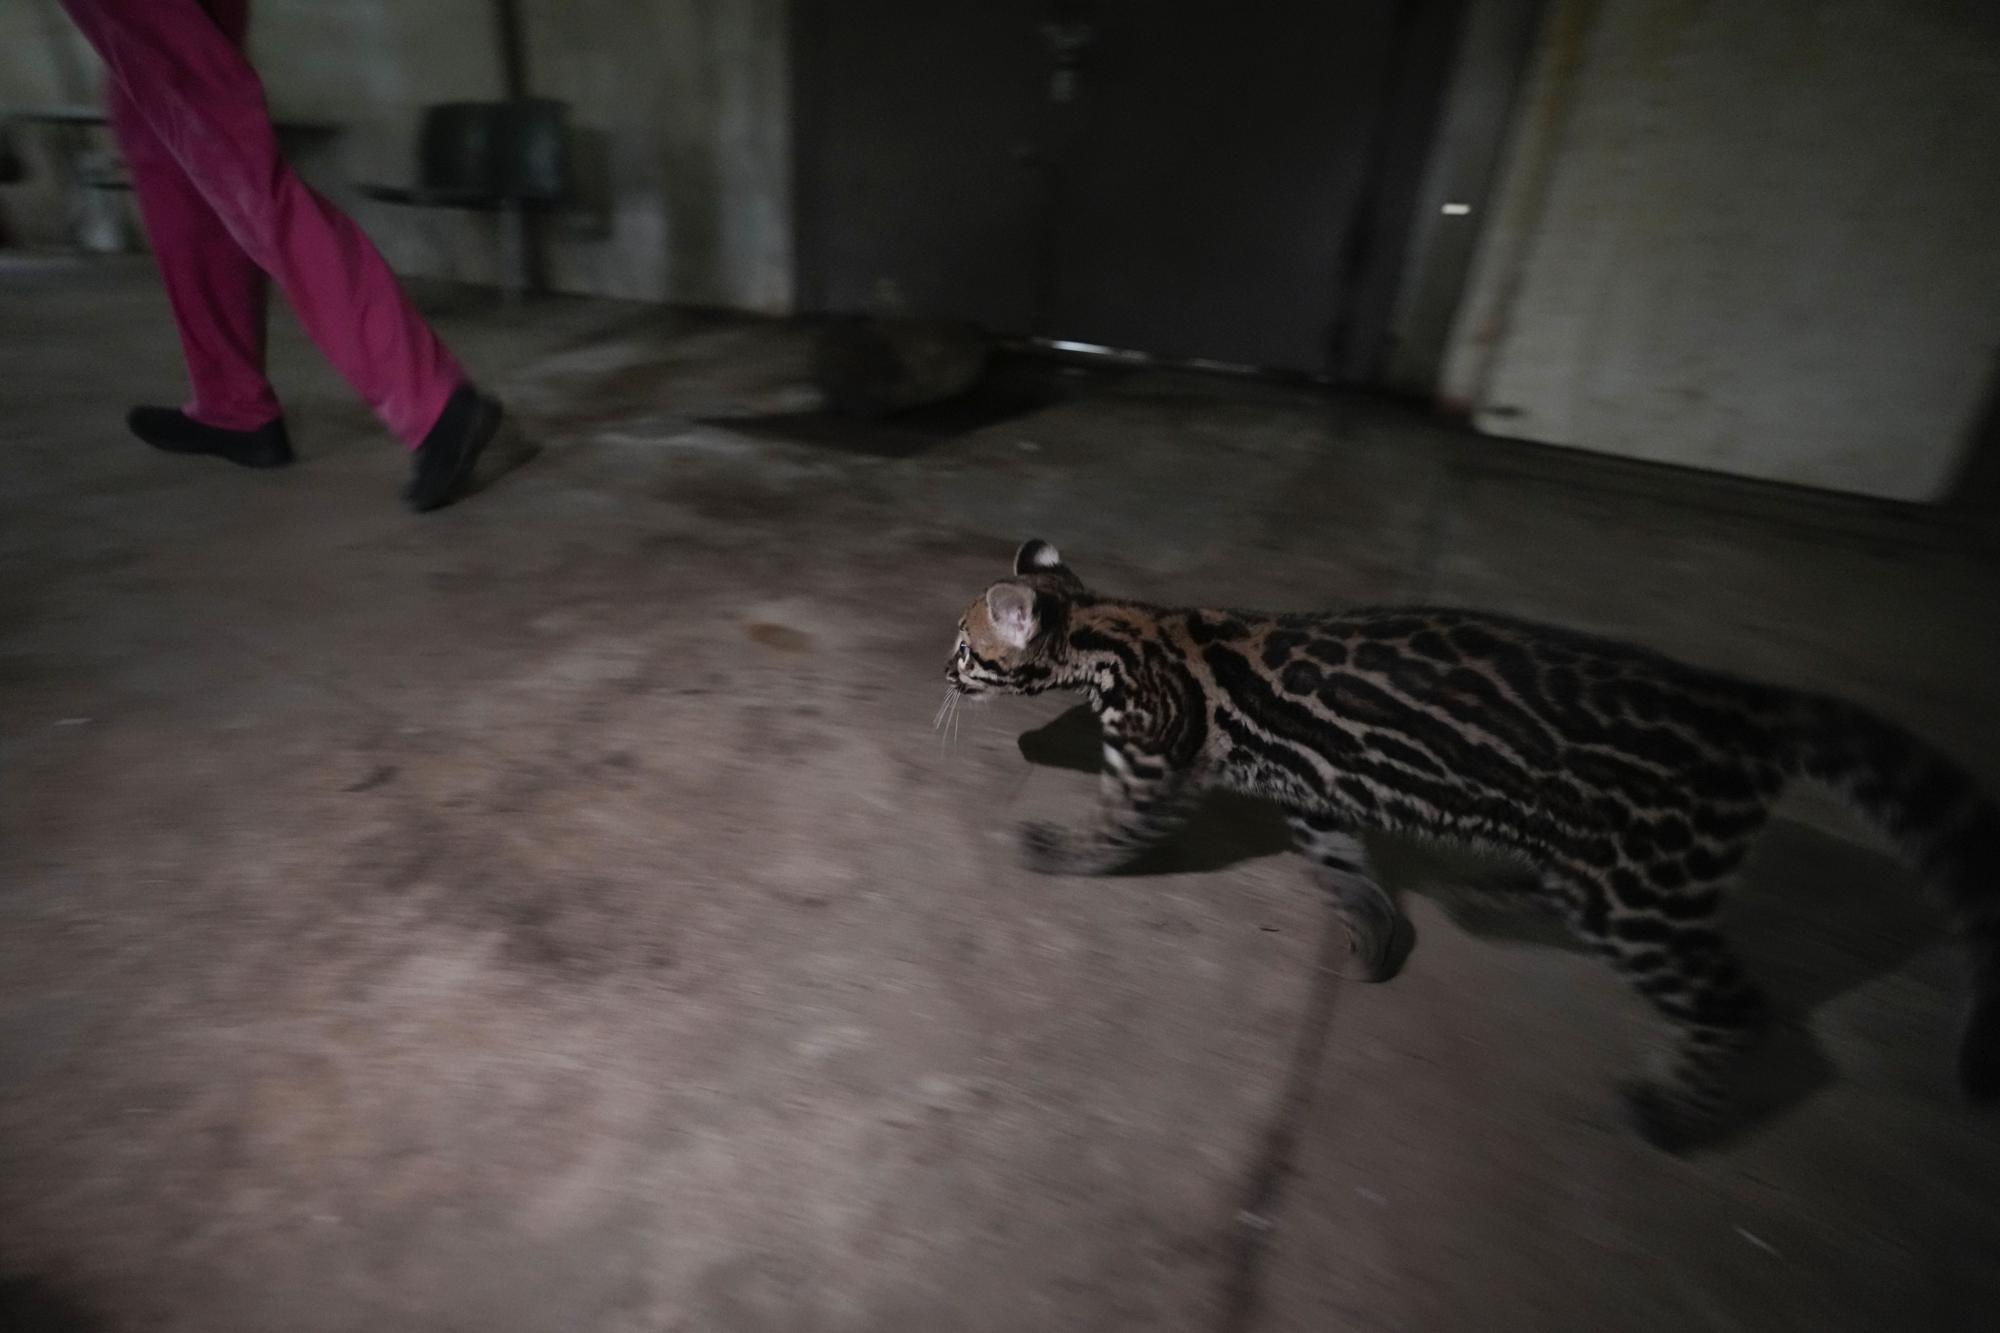 An ocelot follows a veterinarian after being given medical care before being released back into the wild, at a Ministry of the Environment rehabilitation center in Panama City, Wednesday, Sept. 28, 2022. This new government rehabilitation center, which was built on land adjacent to former U.S. military facilities, began receiving animals during the COVID-19 pandemic. (AP Photo/Arnulfo Franco)